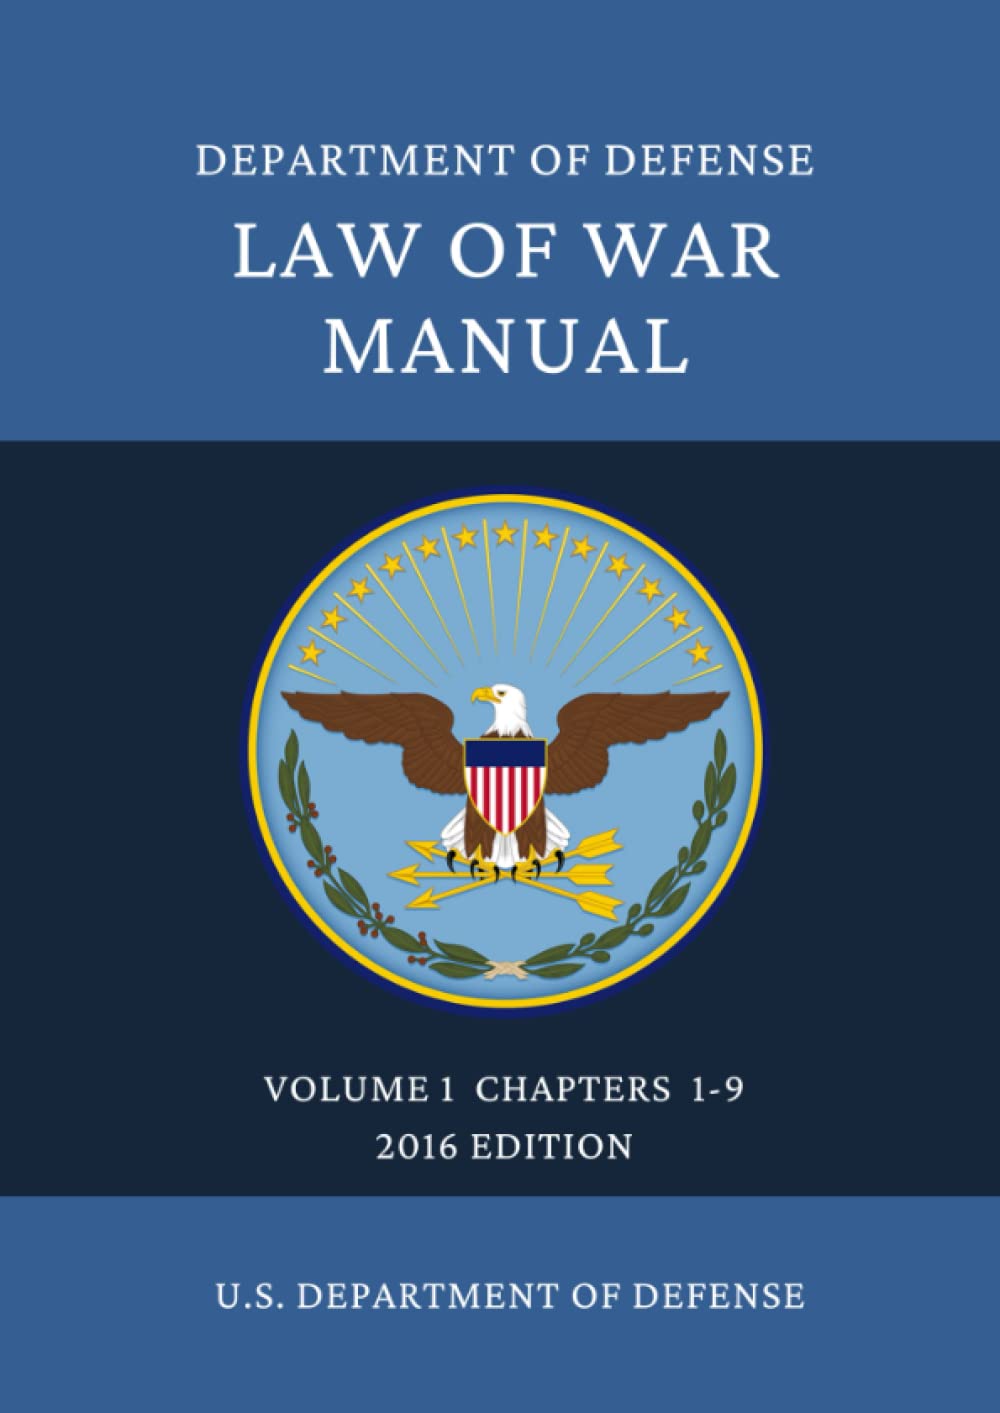 Department of Defense Law of War Manual: Volume 1 Chapters 1-9 2016 Edition